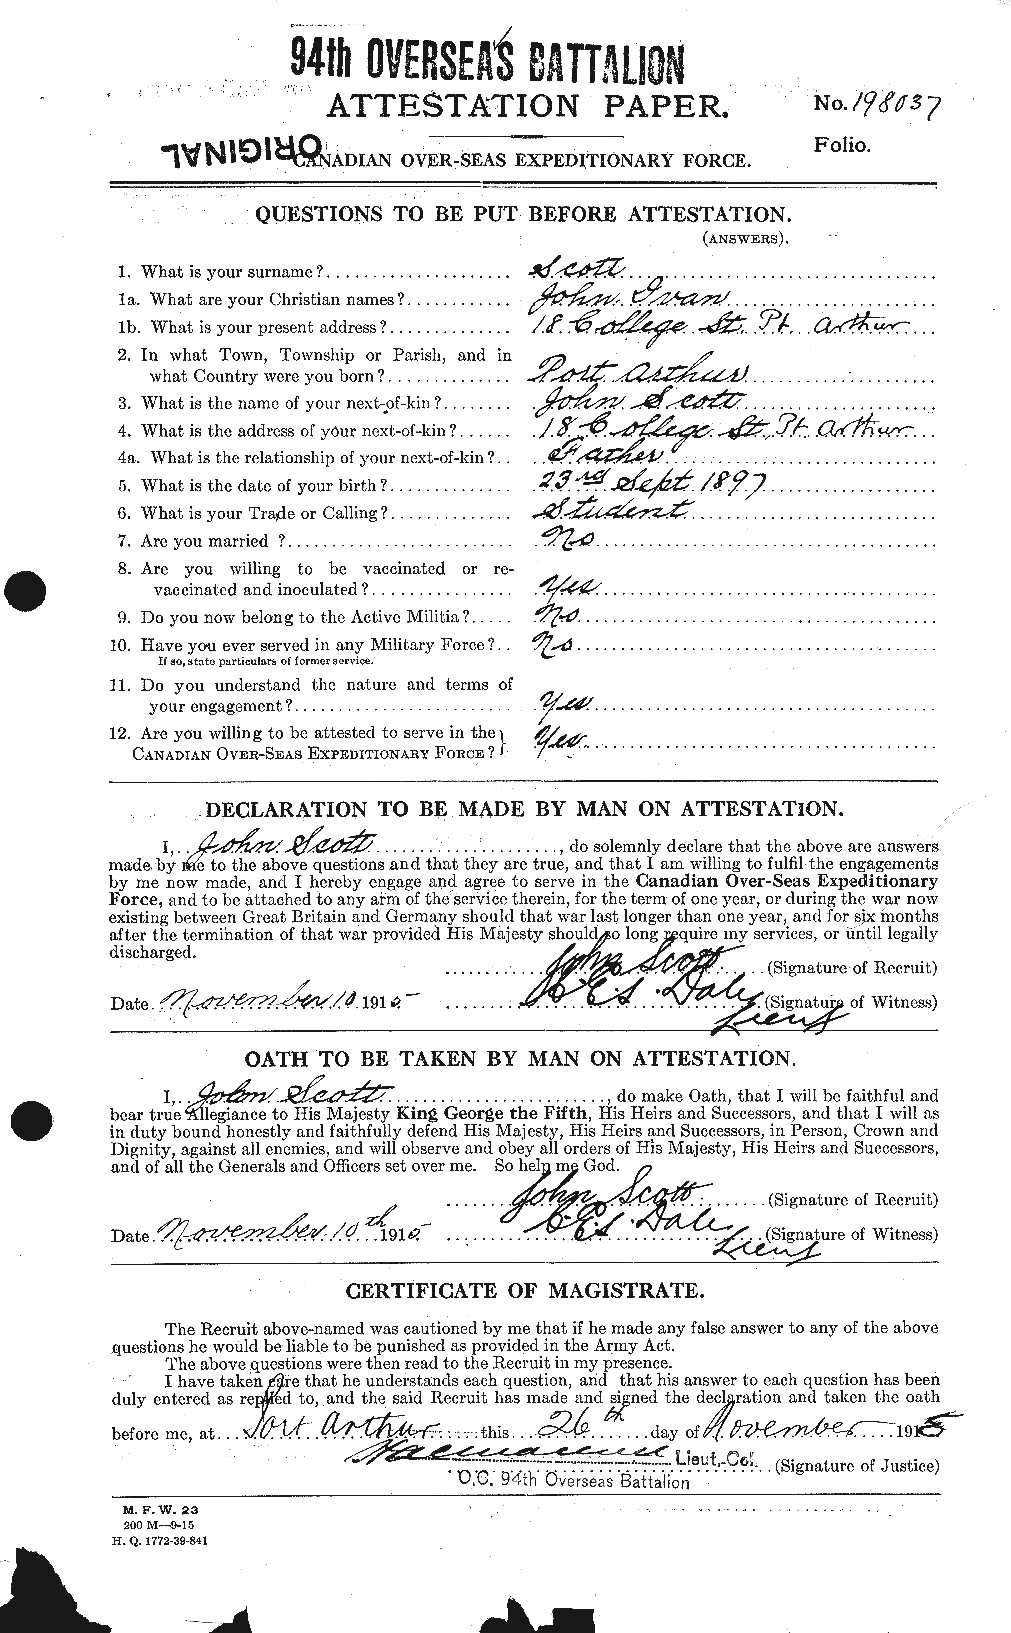 Personnel Records of the First World War - CEF 084452a